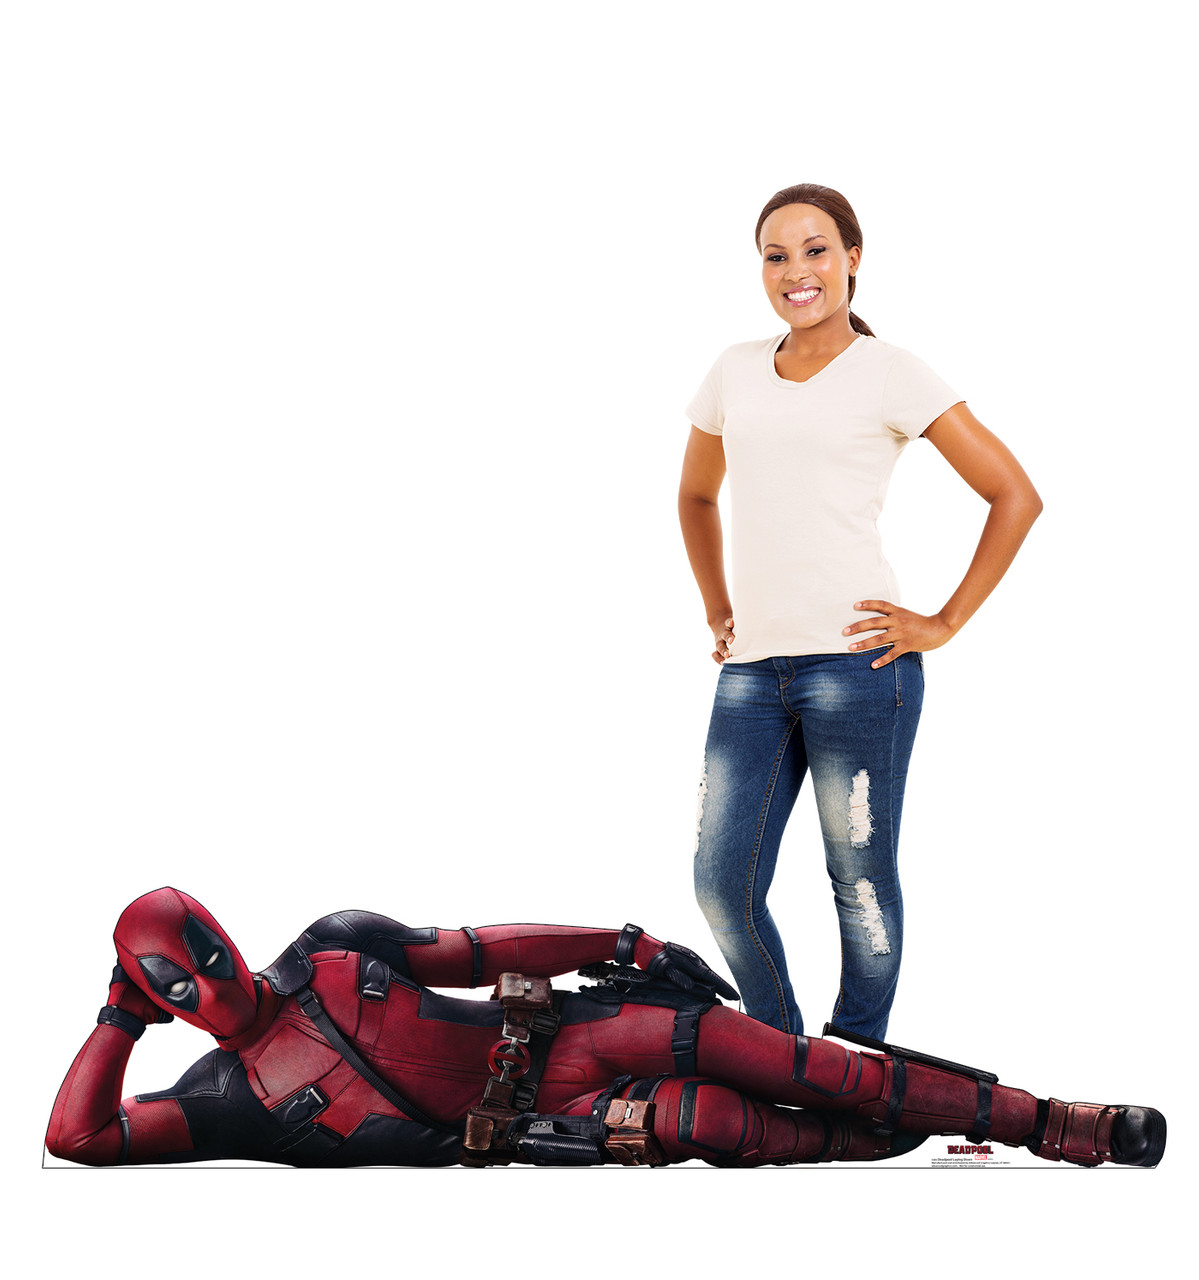 Life-size cardboard standee of Deadpool Laying Down with model.